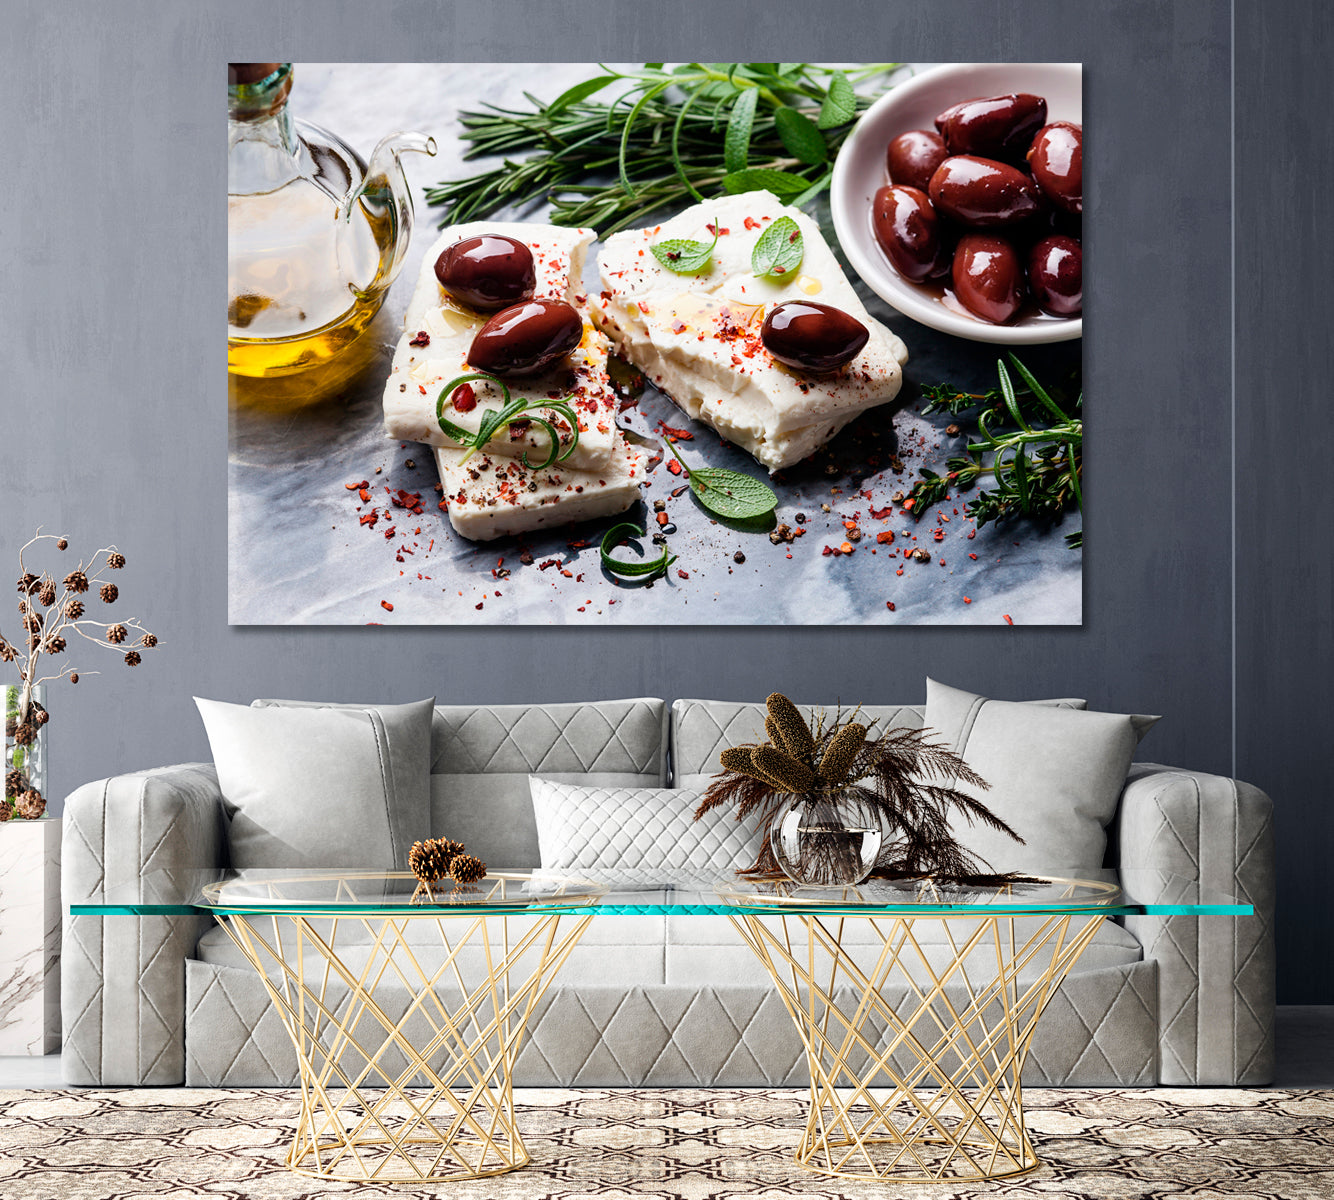 Feta Cheese with Olives Canvas Print ArtLexy 1 Panel 24"x16" inches 